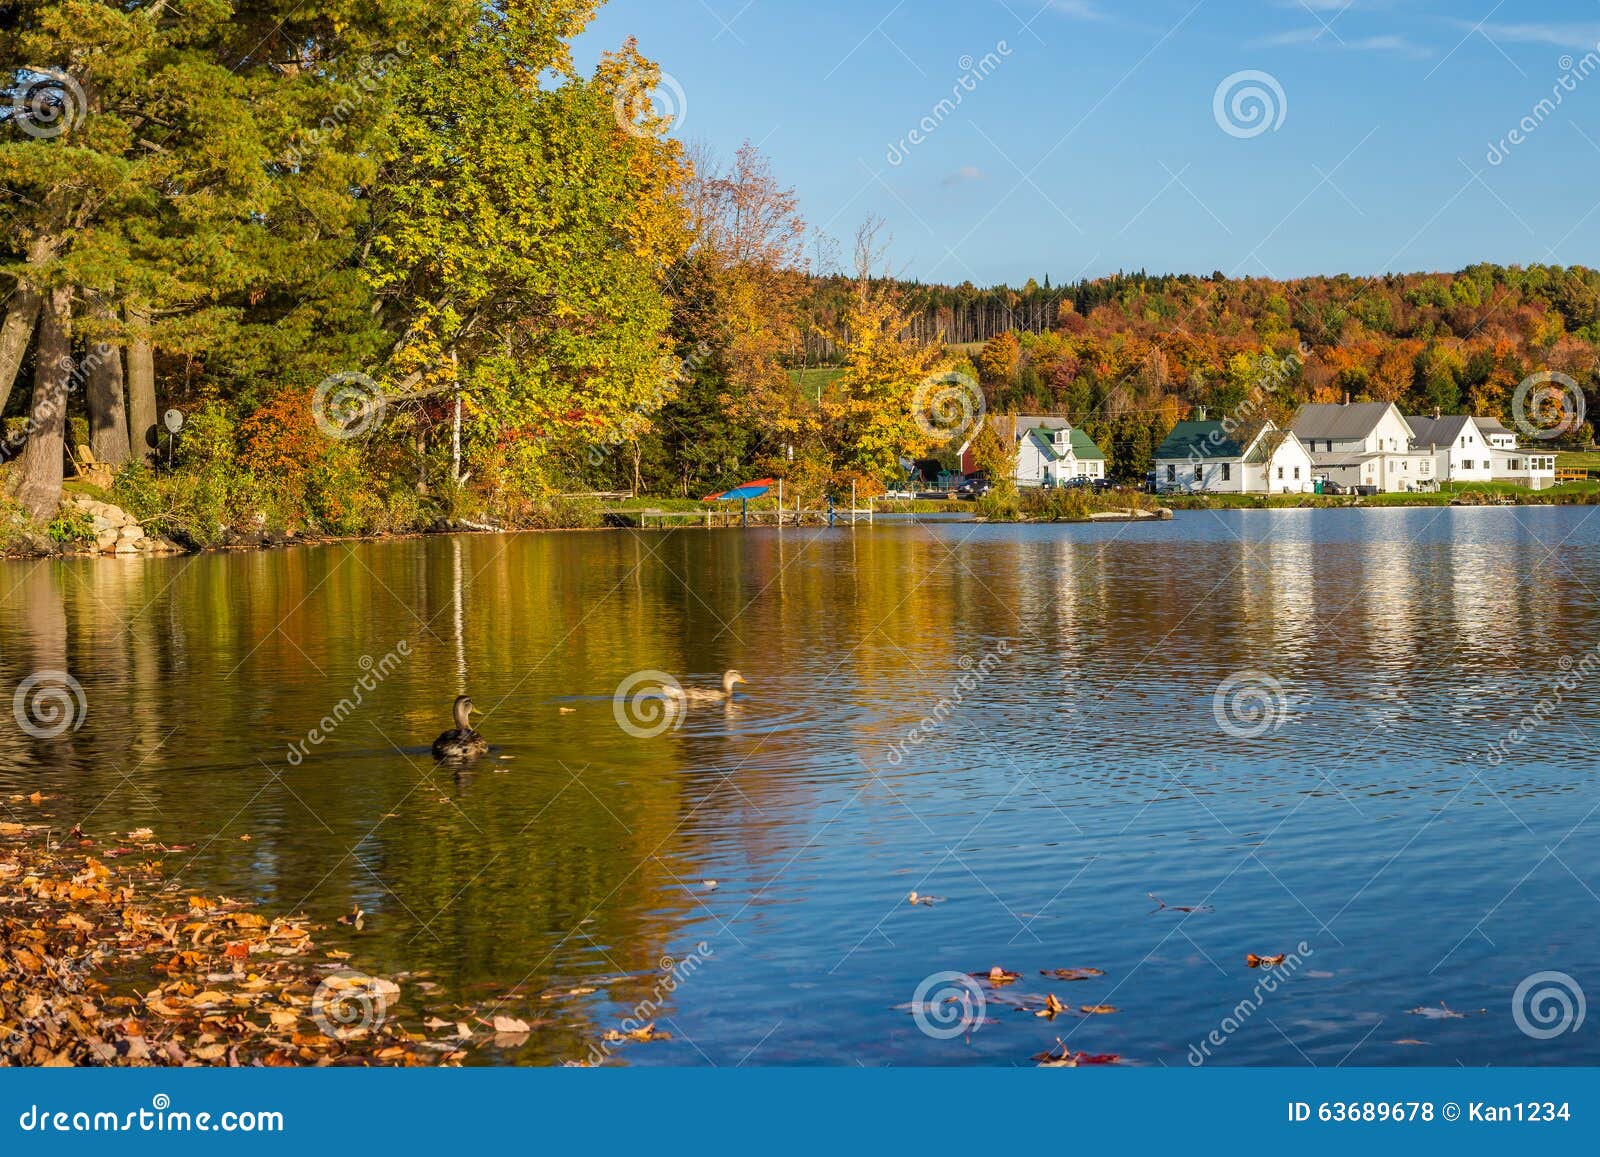 Vermont, USA Fall Foliage - breathtaking Visited October 